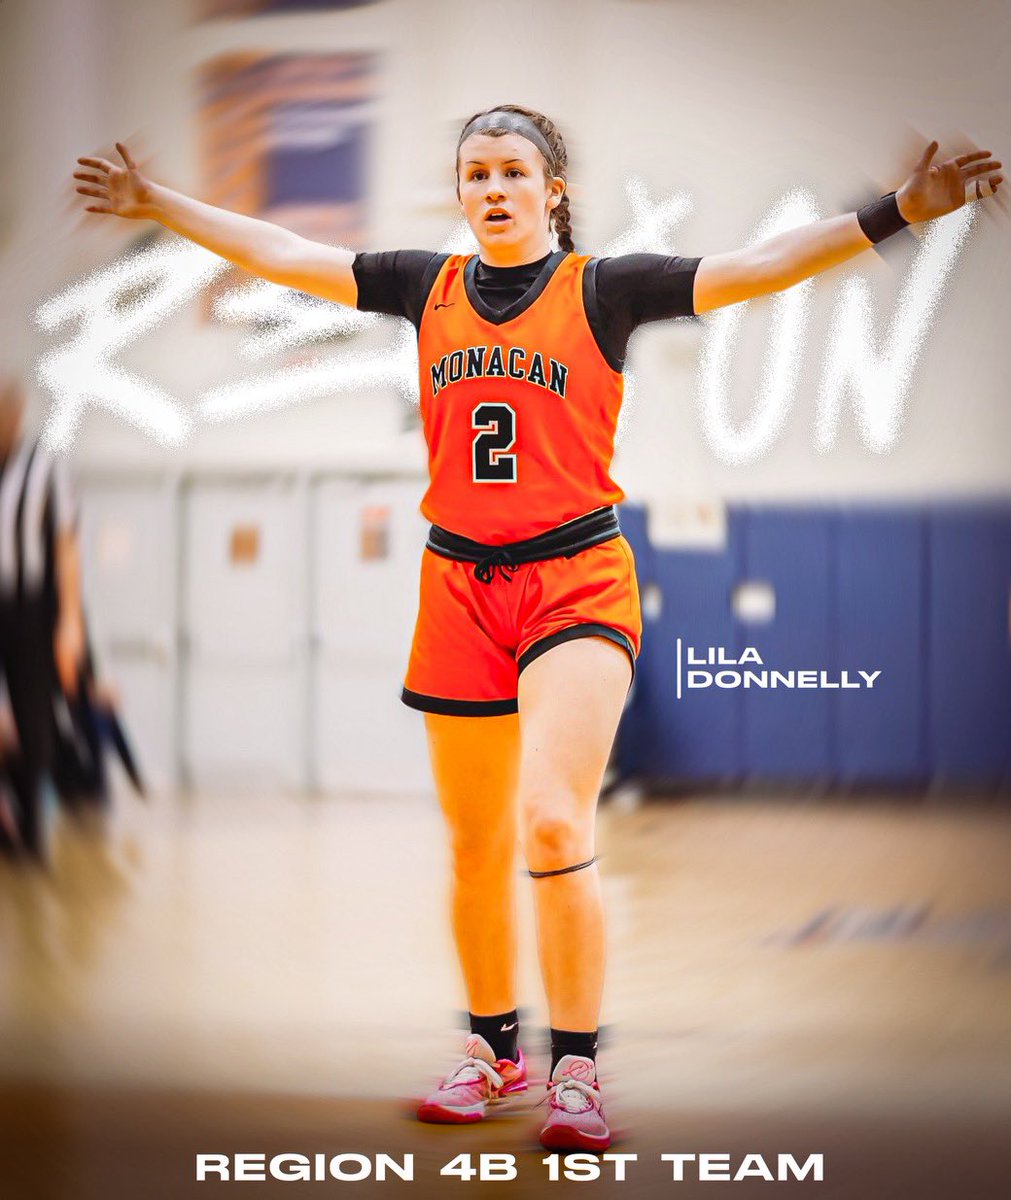 🚨First Team All Region 4B🚨 Thrilled for junior guard Lila Donnelly (@liladonnelly2) for being recognized as one of the top players in our region! Lila has averaged 12ppg, 5rpg, and 3apg so far this season! Keep it rolling Lila! 🔥 #ChiefPride #rvaW @cfieldsports